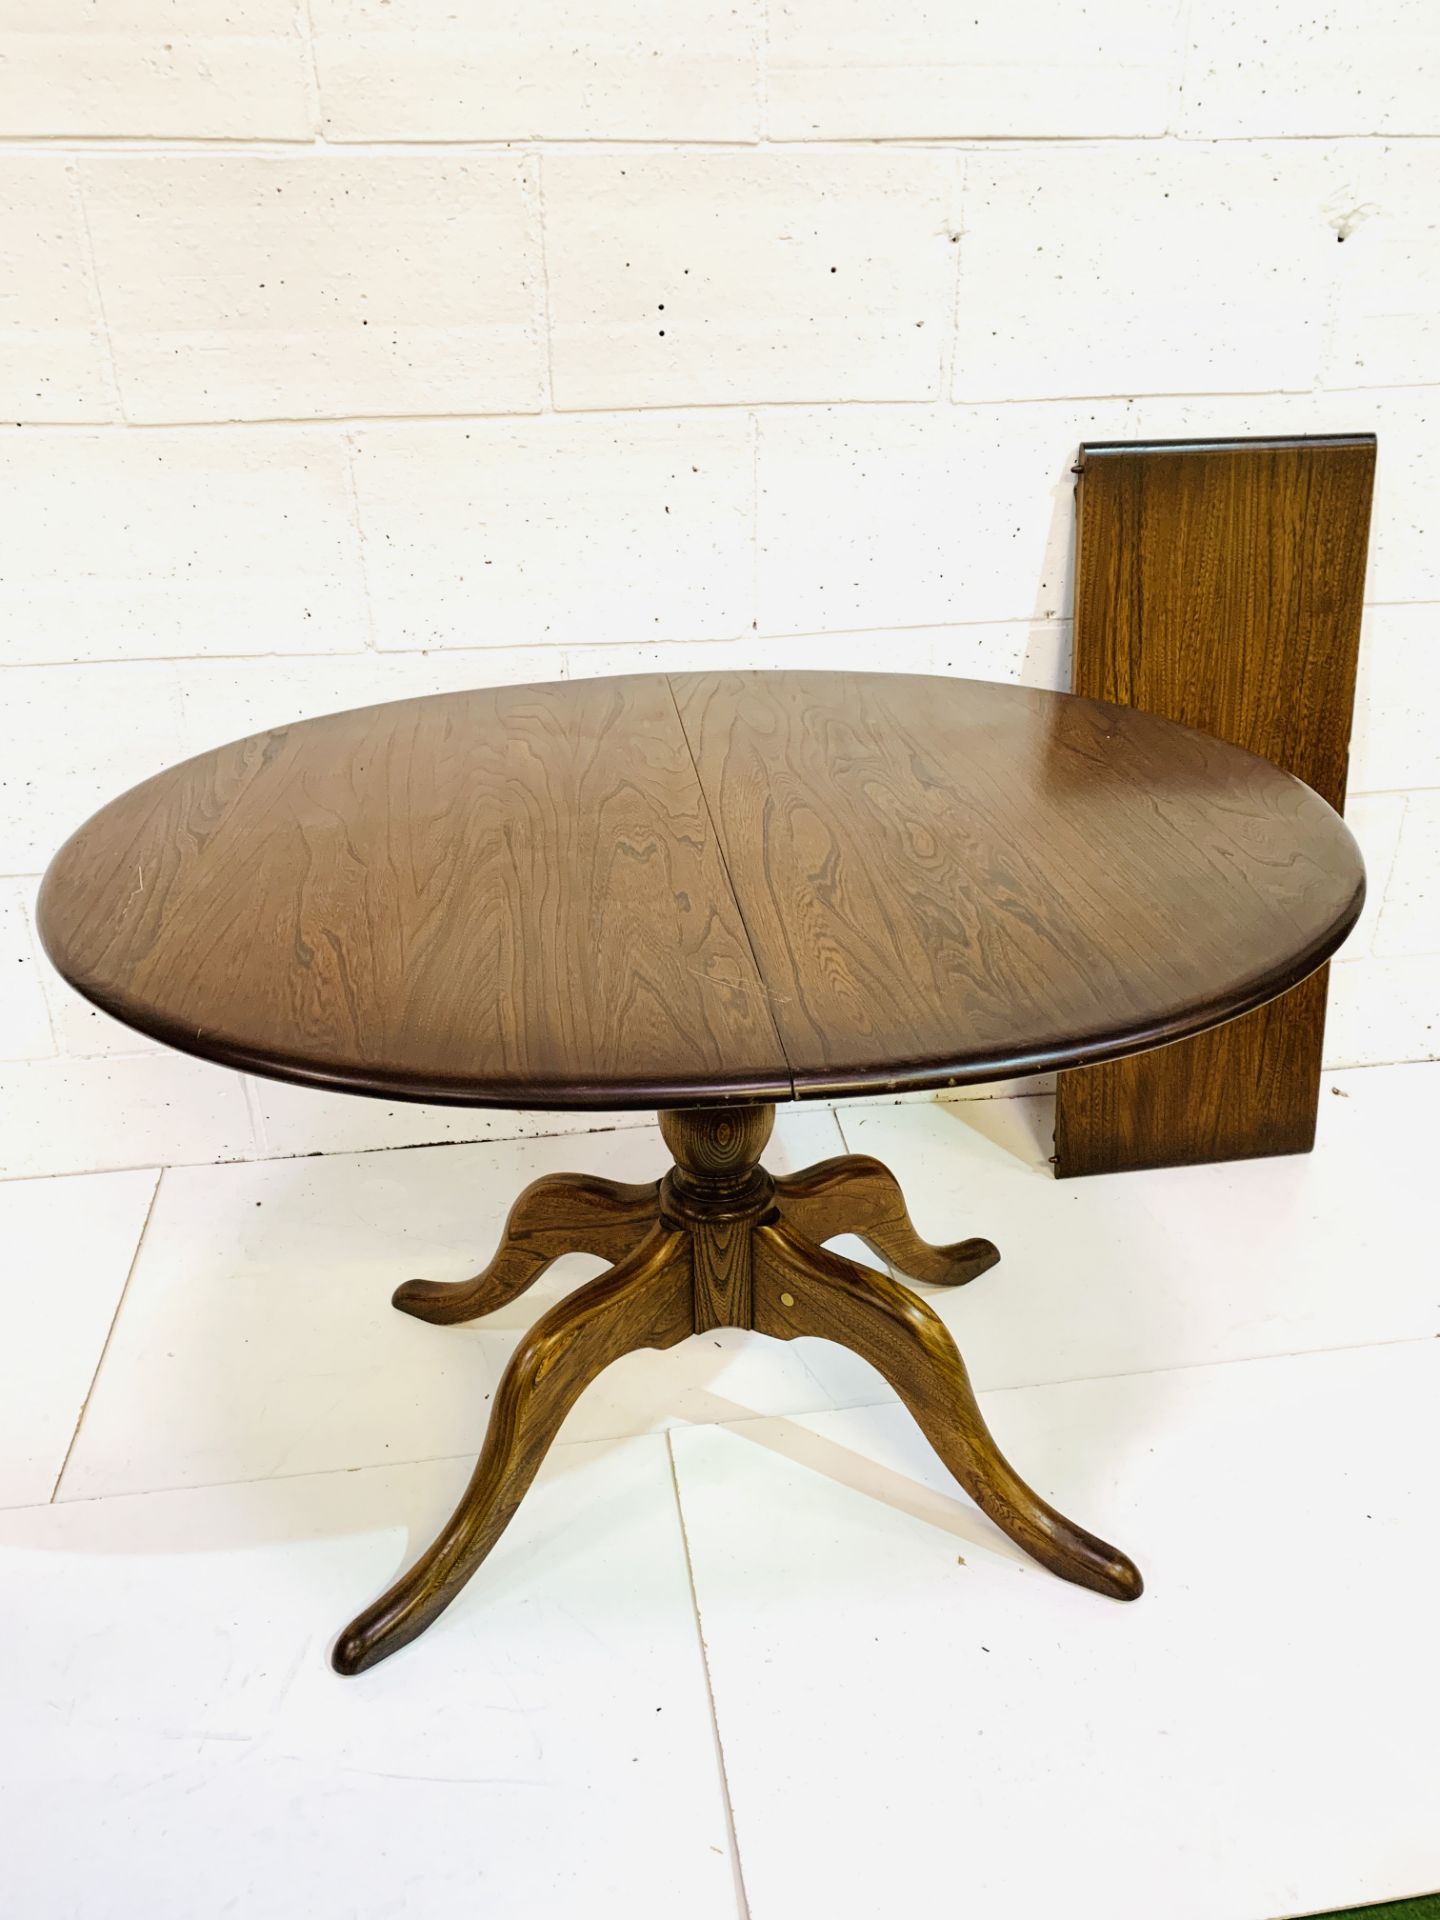 Ercol oval top extendable table - Image 2 of 4